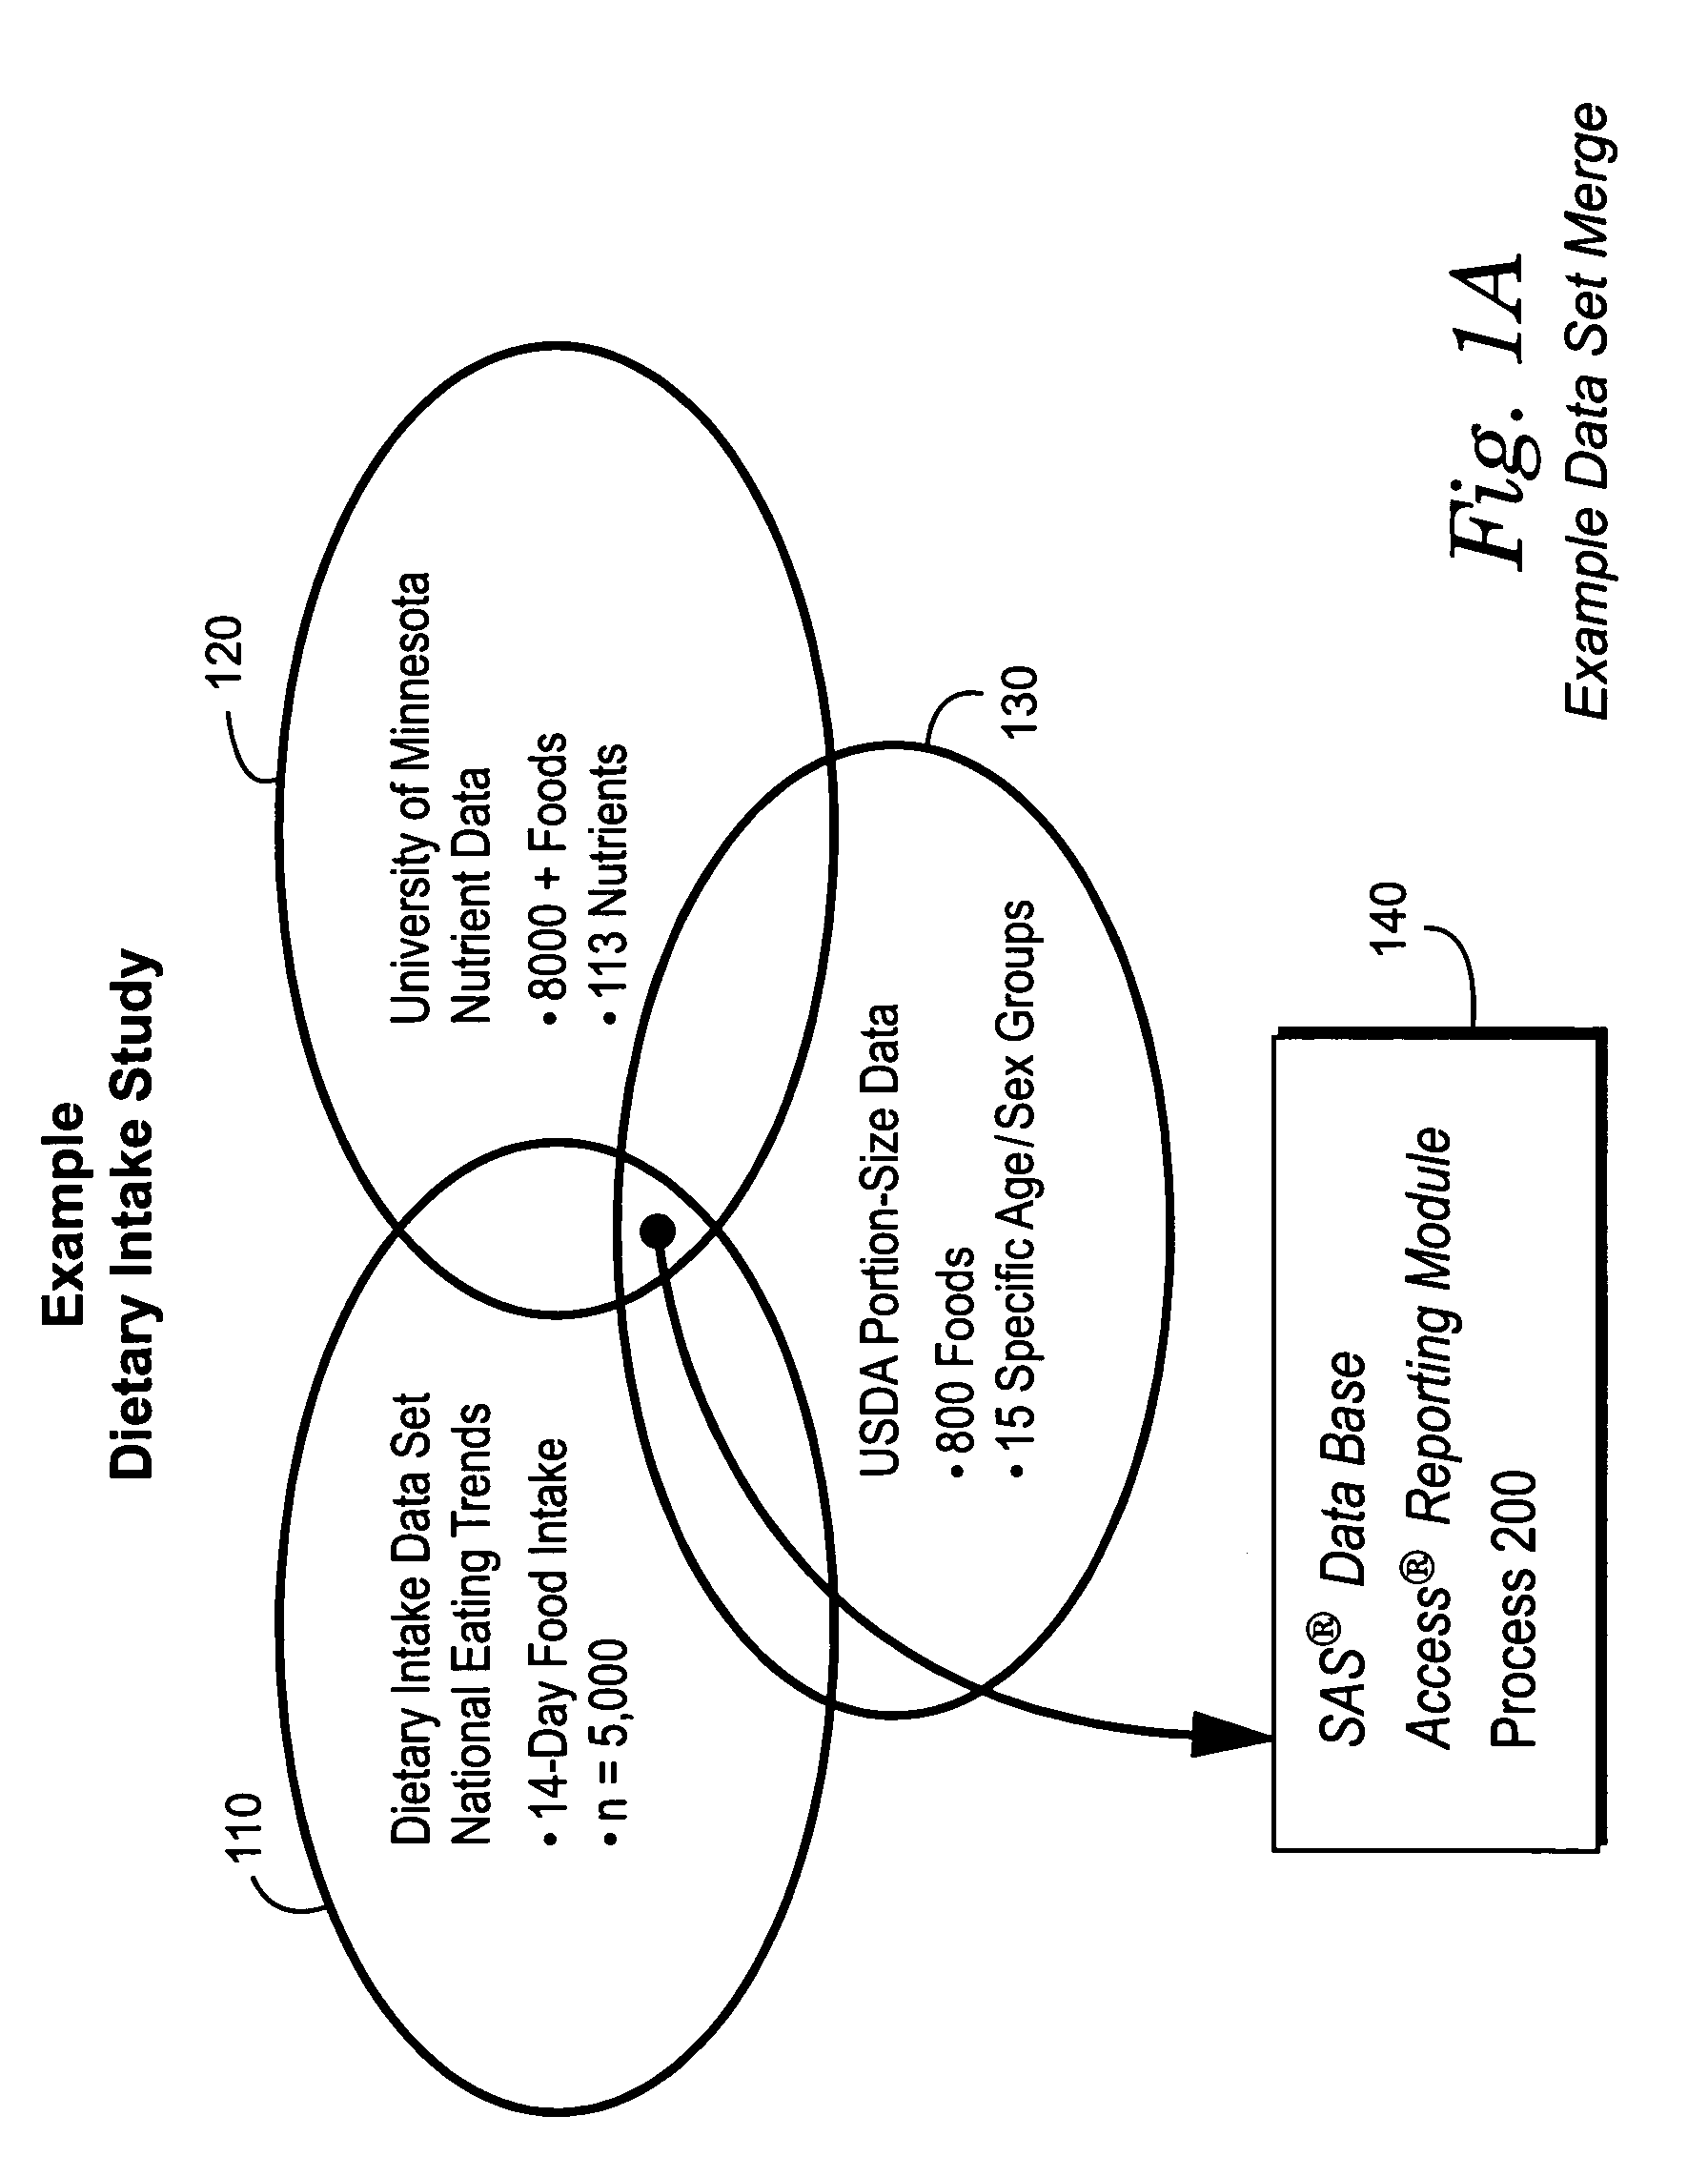 Systems and methods for determining nutrients within dietary intake